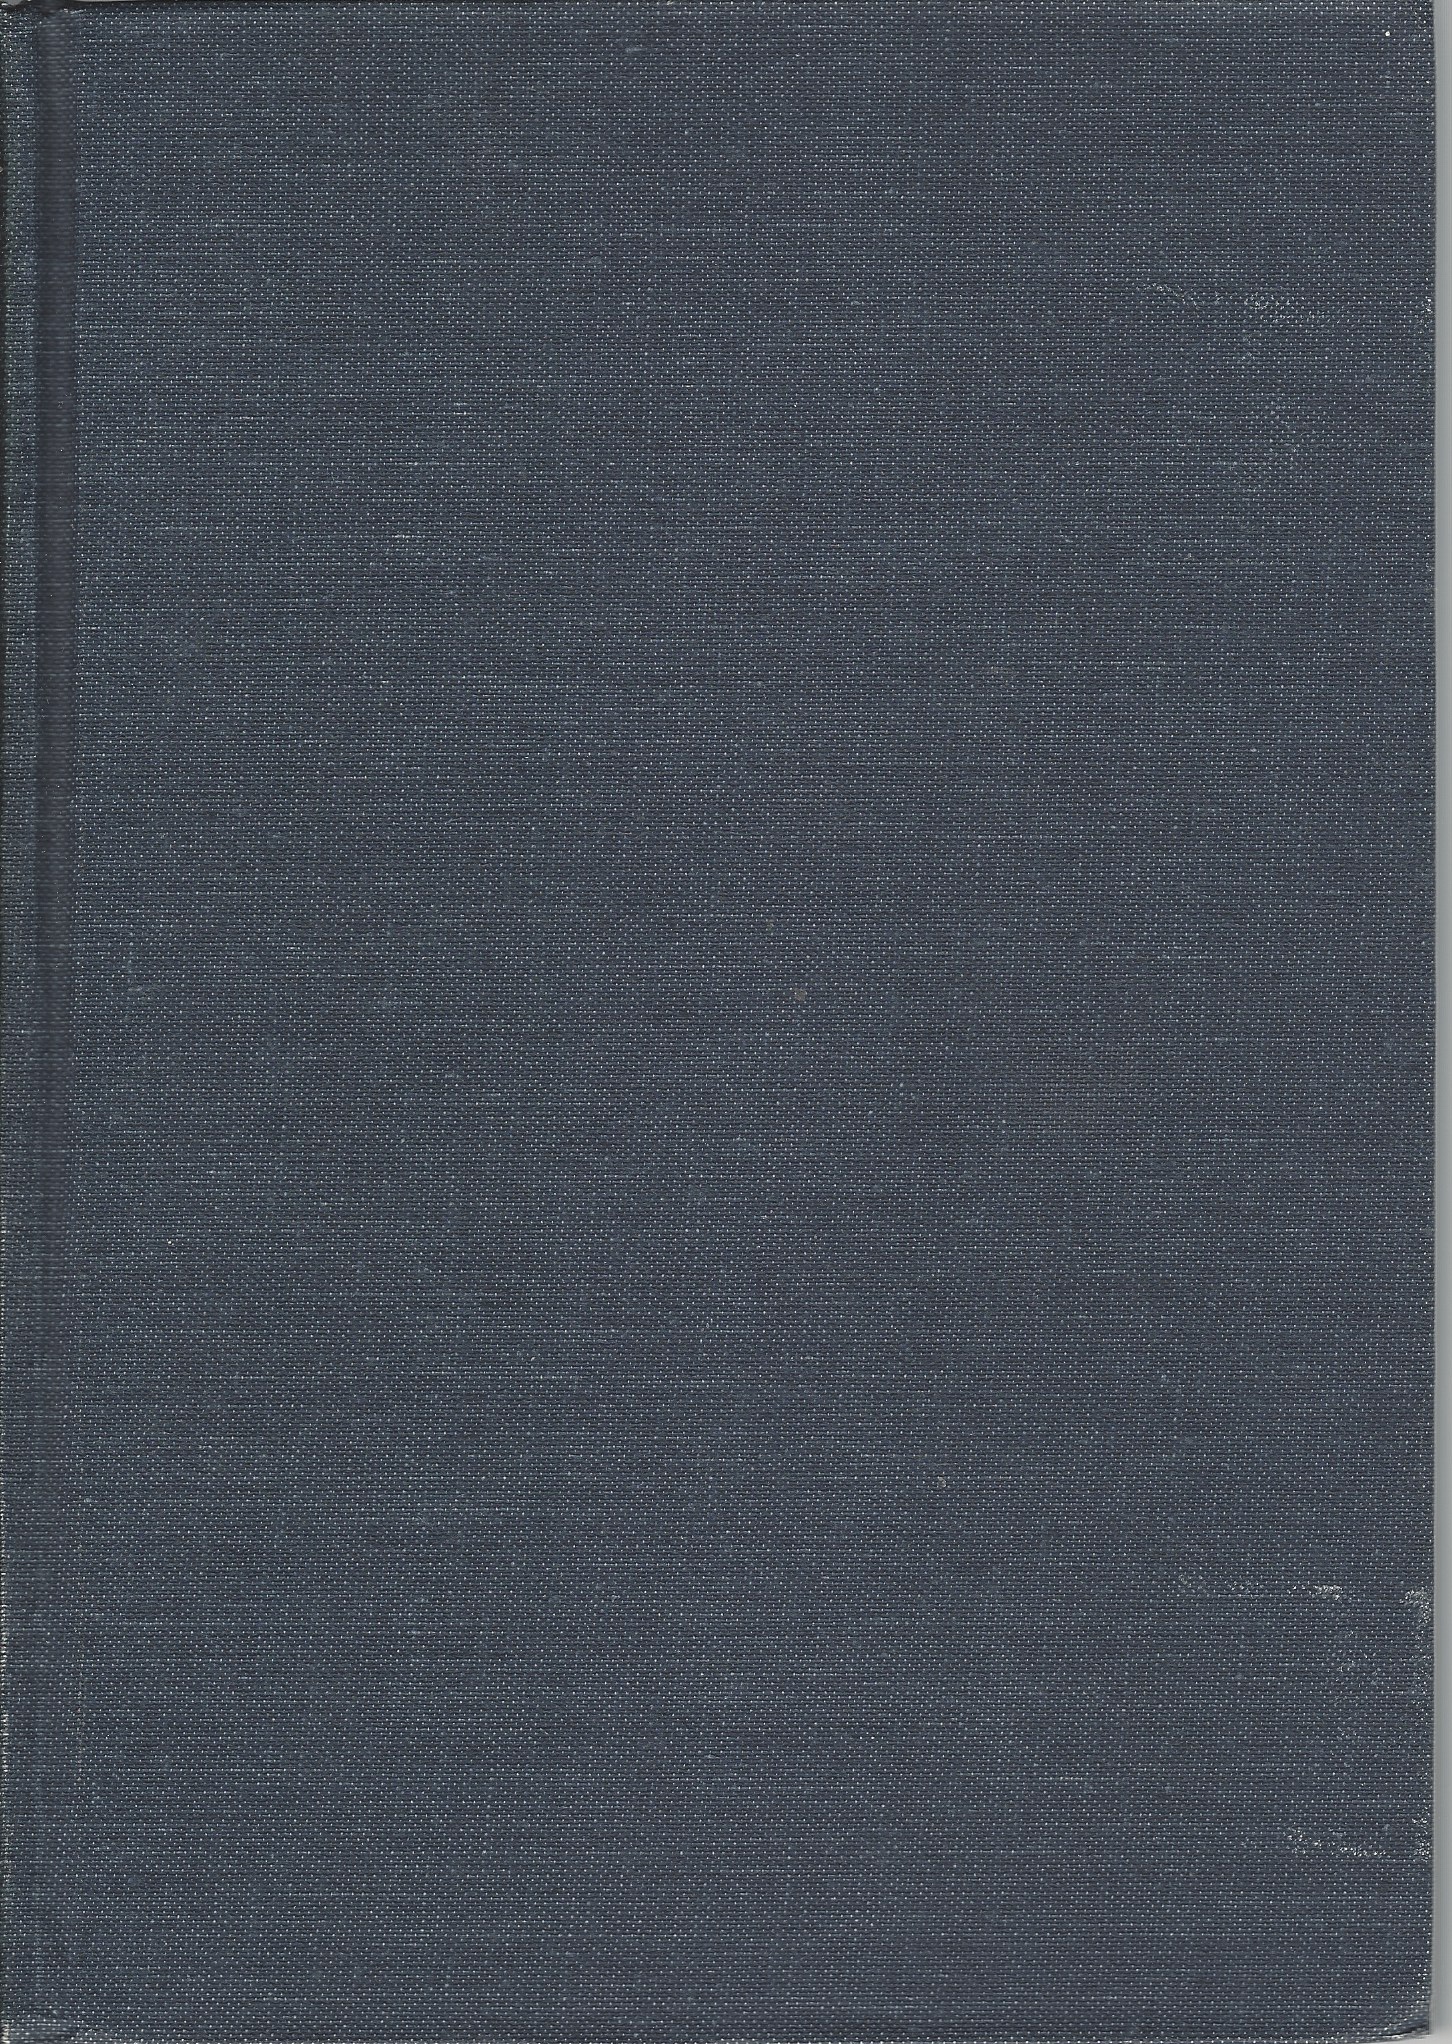 COLLECTIF - European & American Painting, Sculpture, and Decorative Arts. Volume 1 / 1300-1800/Text